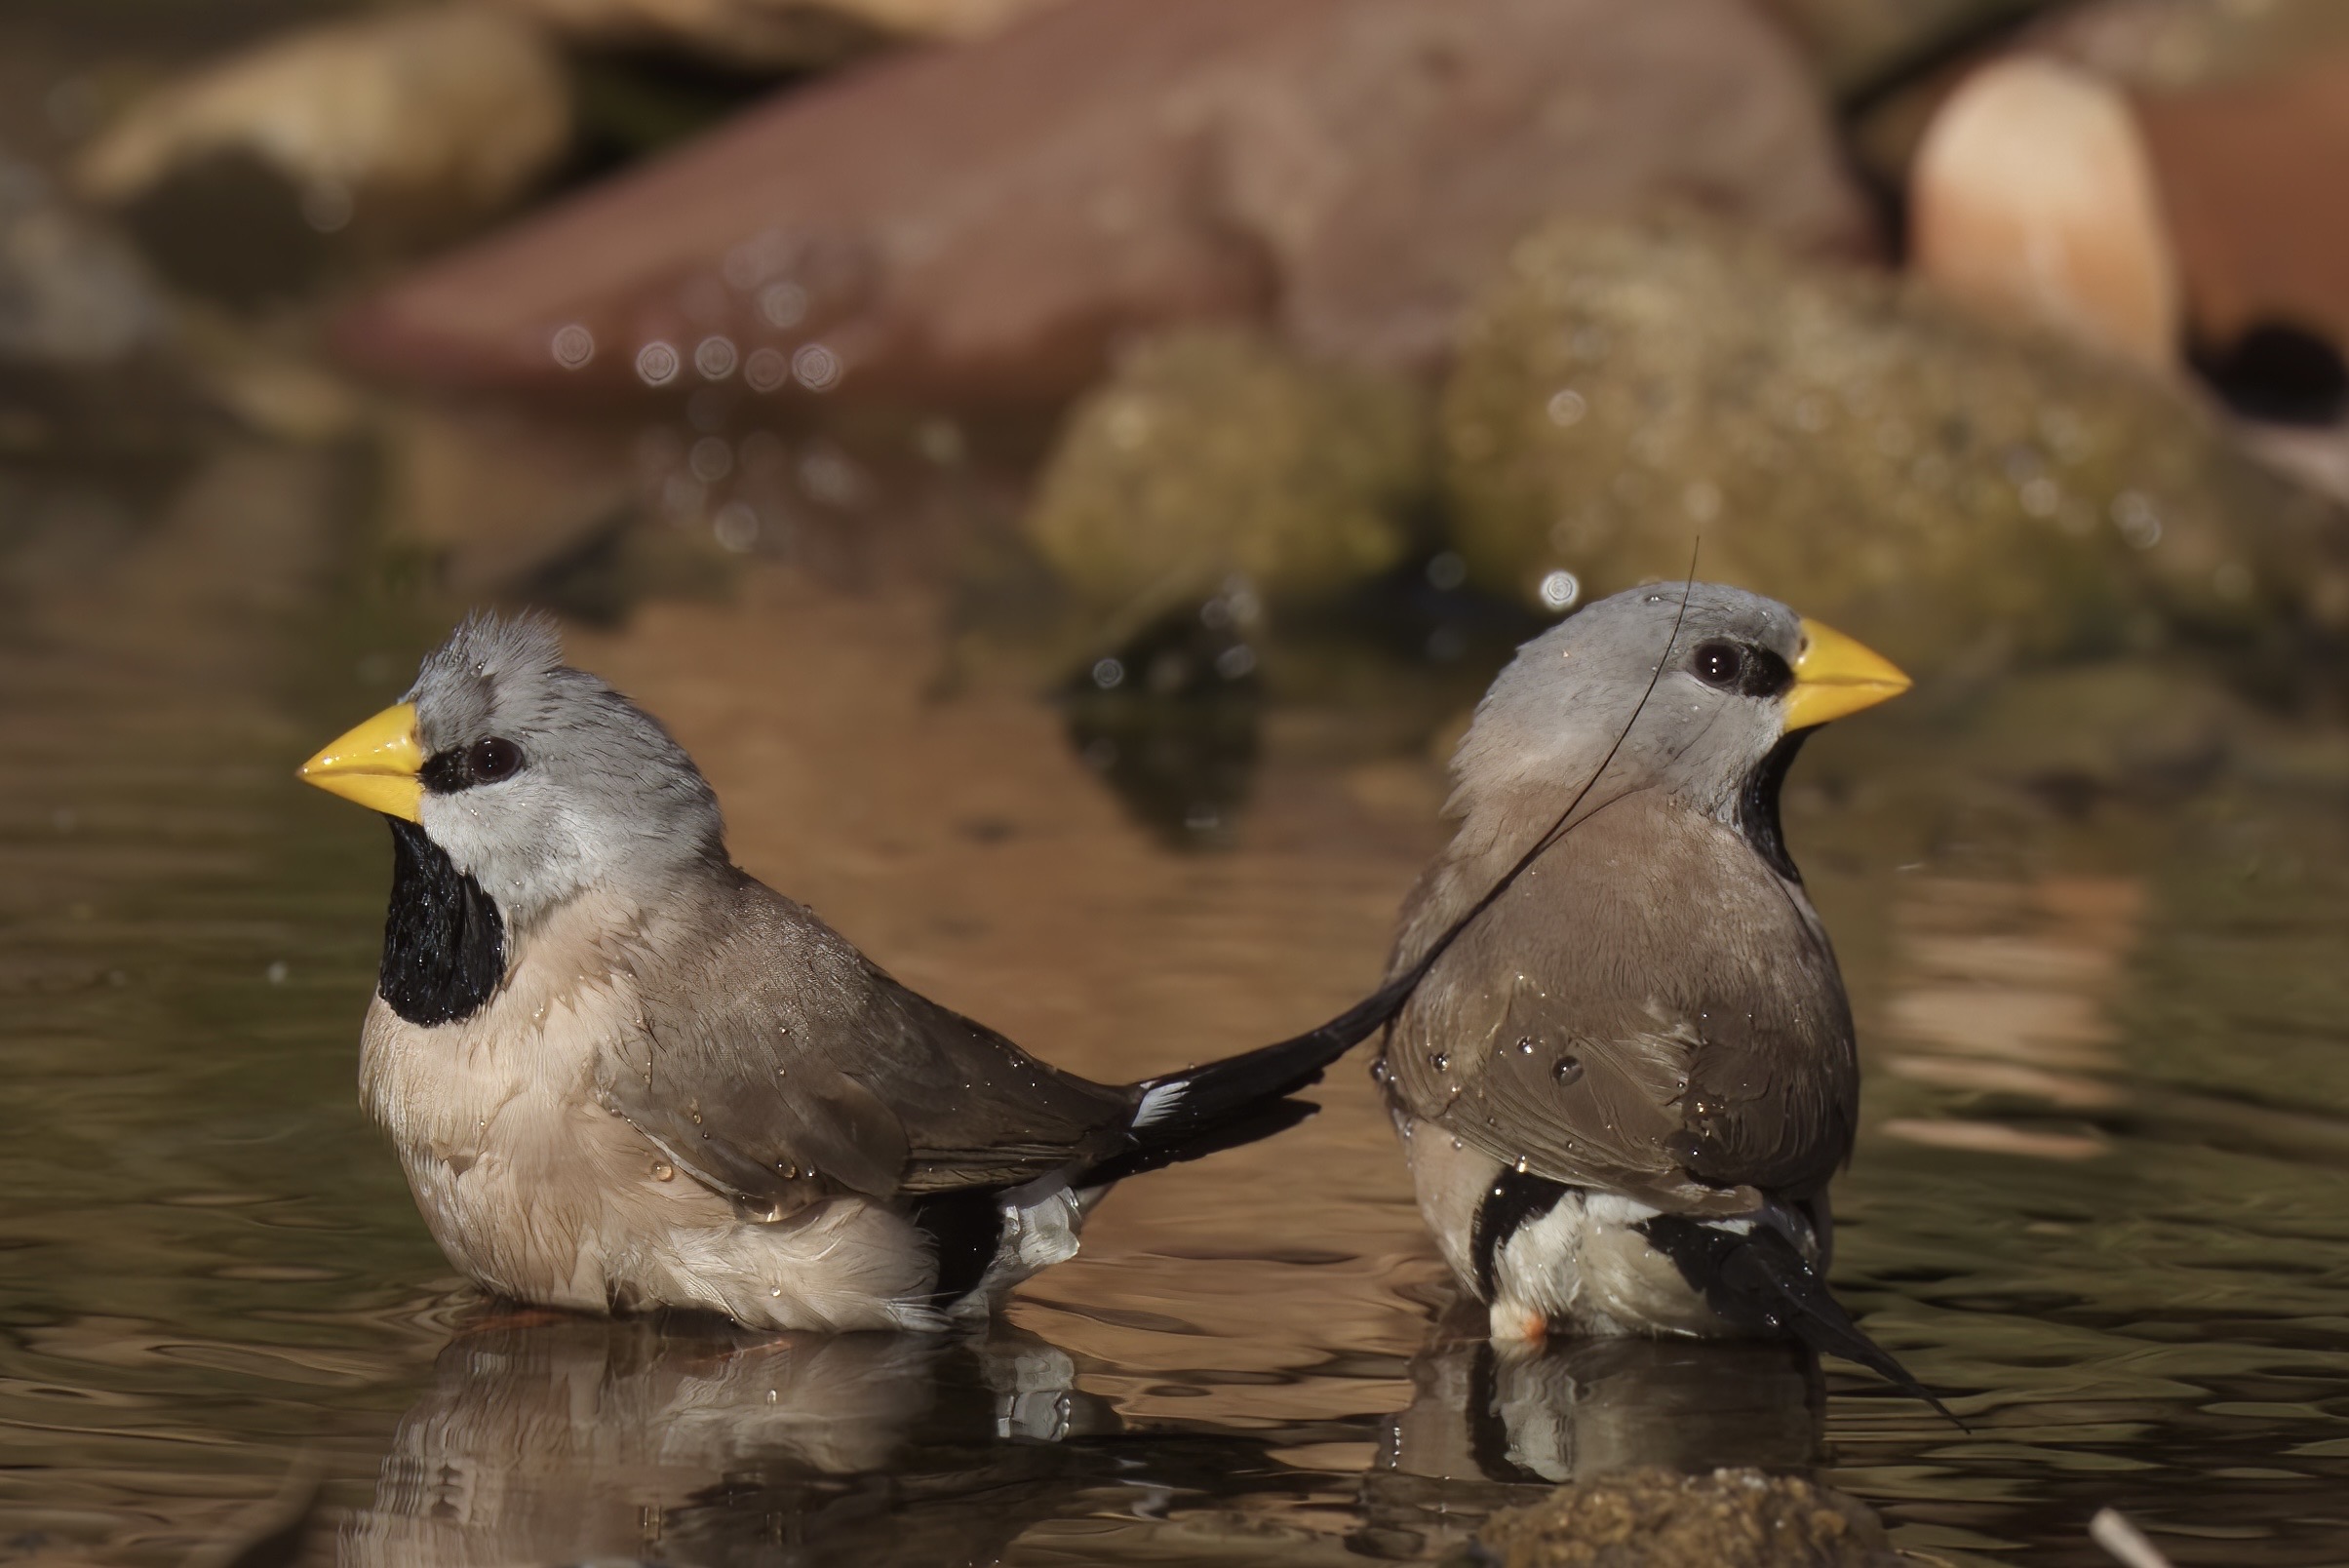 Long-tailed finches